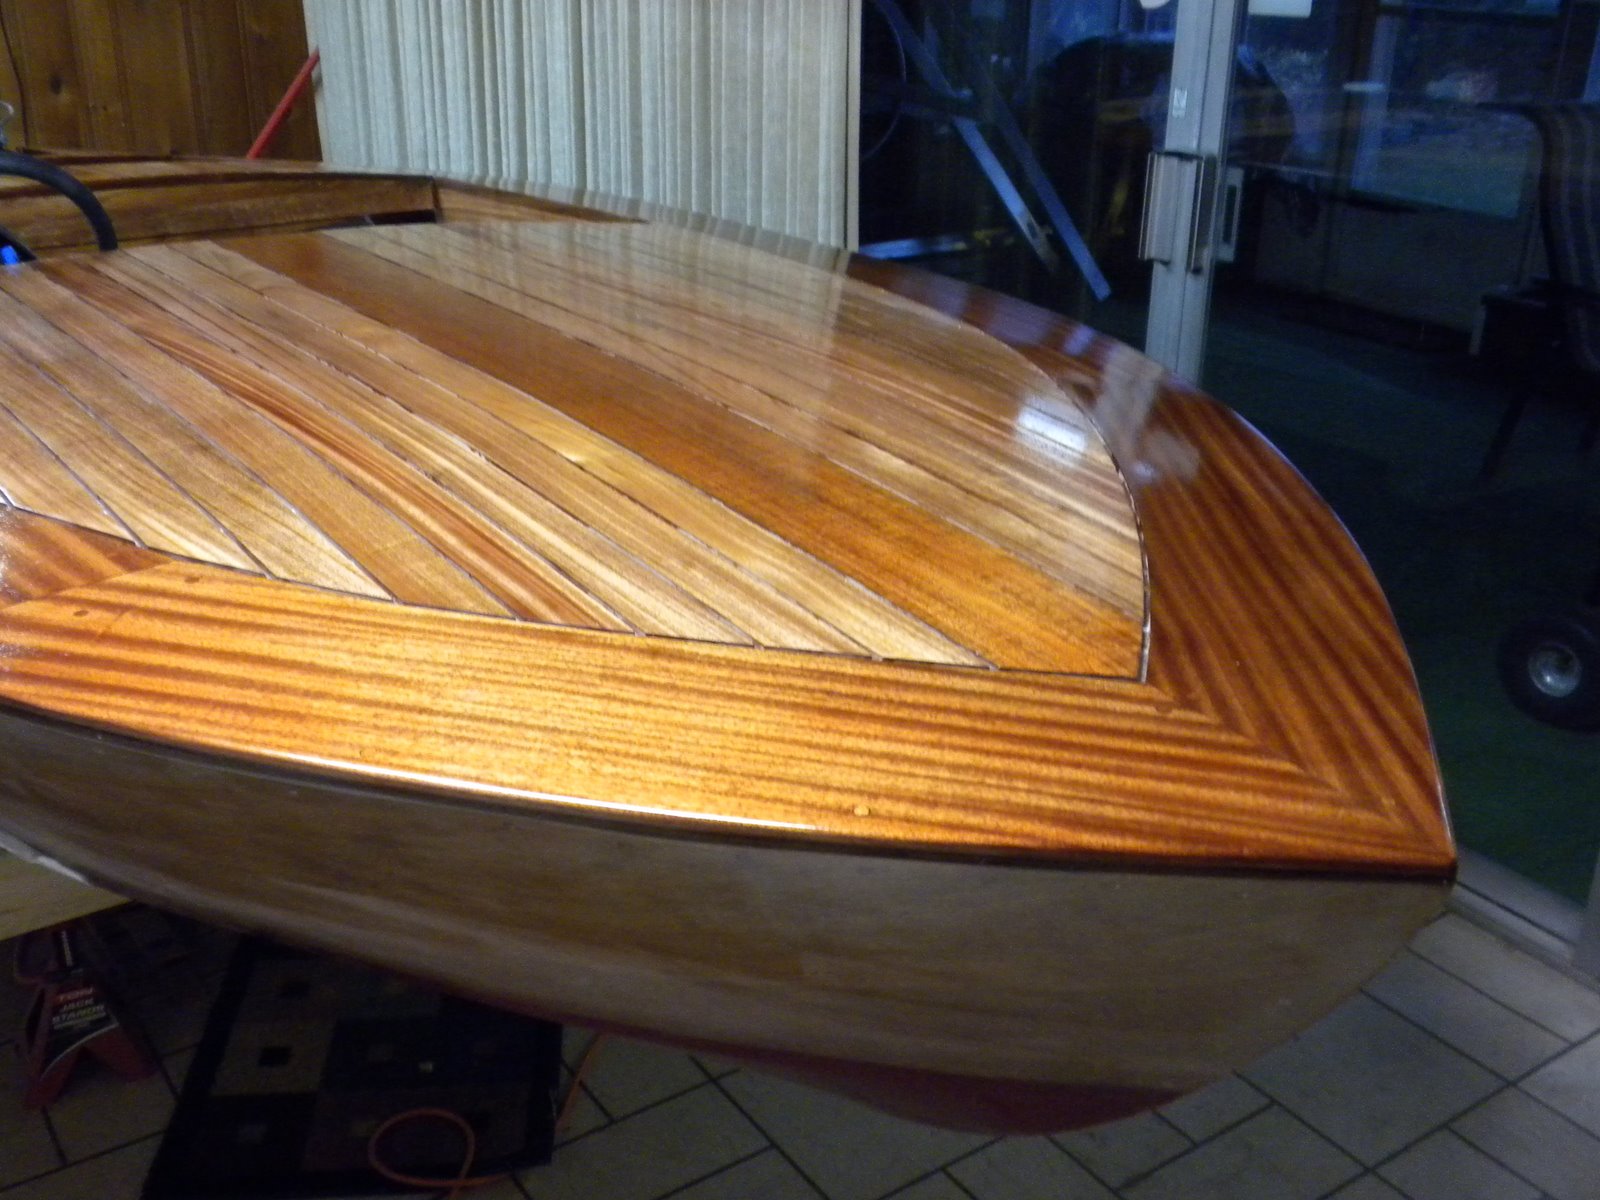 ted's wood boat: epoxy issue resolved